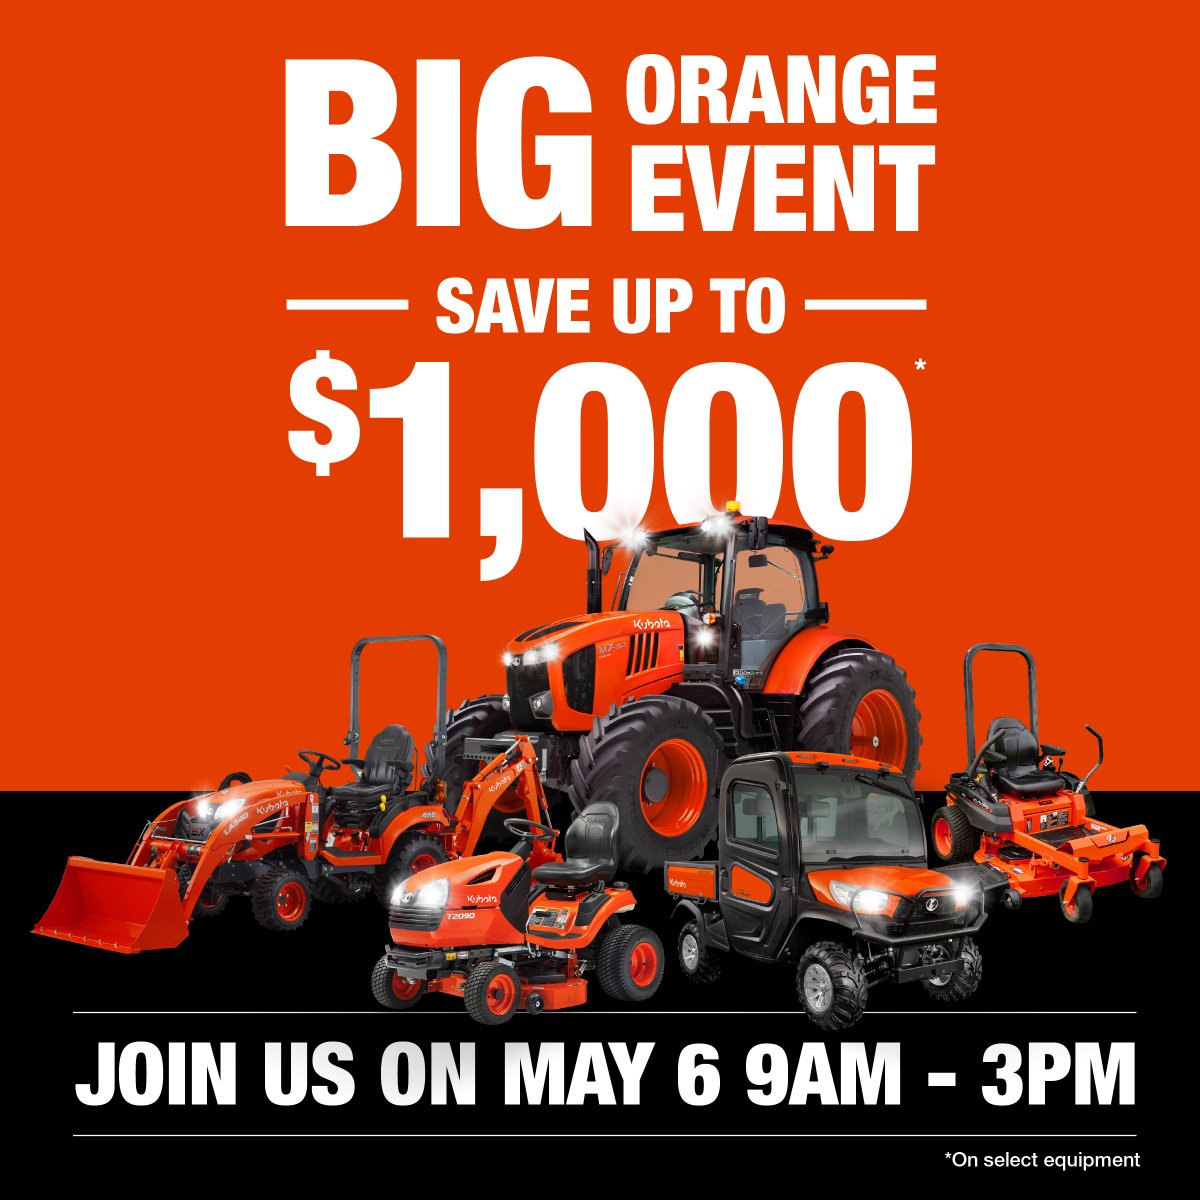 Join us at Grande Prairie Kubota on May 6 from 9AM - 3PM for the Big Orange Event!  We will be flipping burgers and showcasing the Kubota lineup! You can even save up to $1,000 on your next Kubota purchase! #KeepItOrange